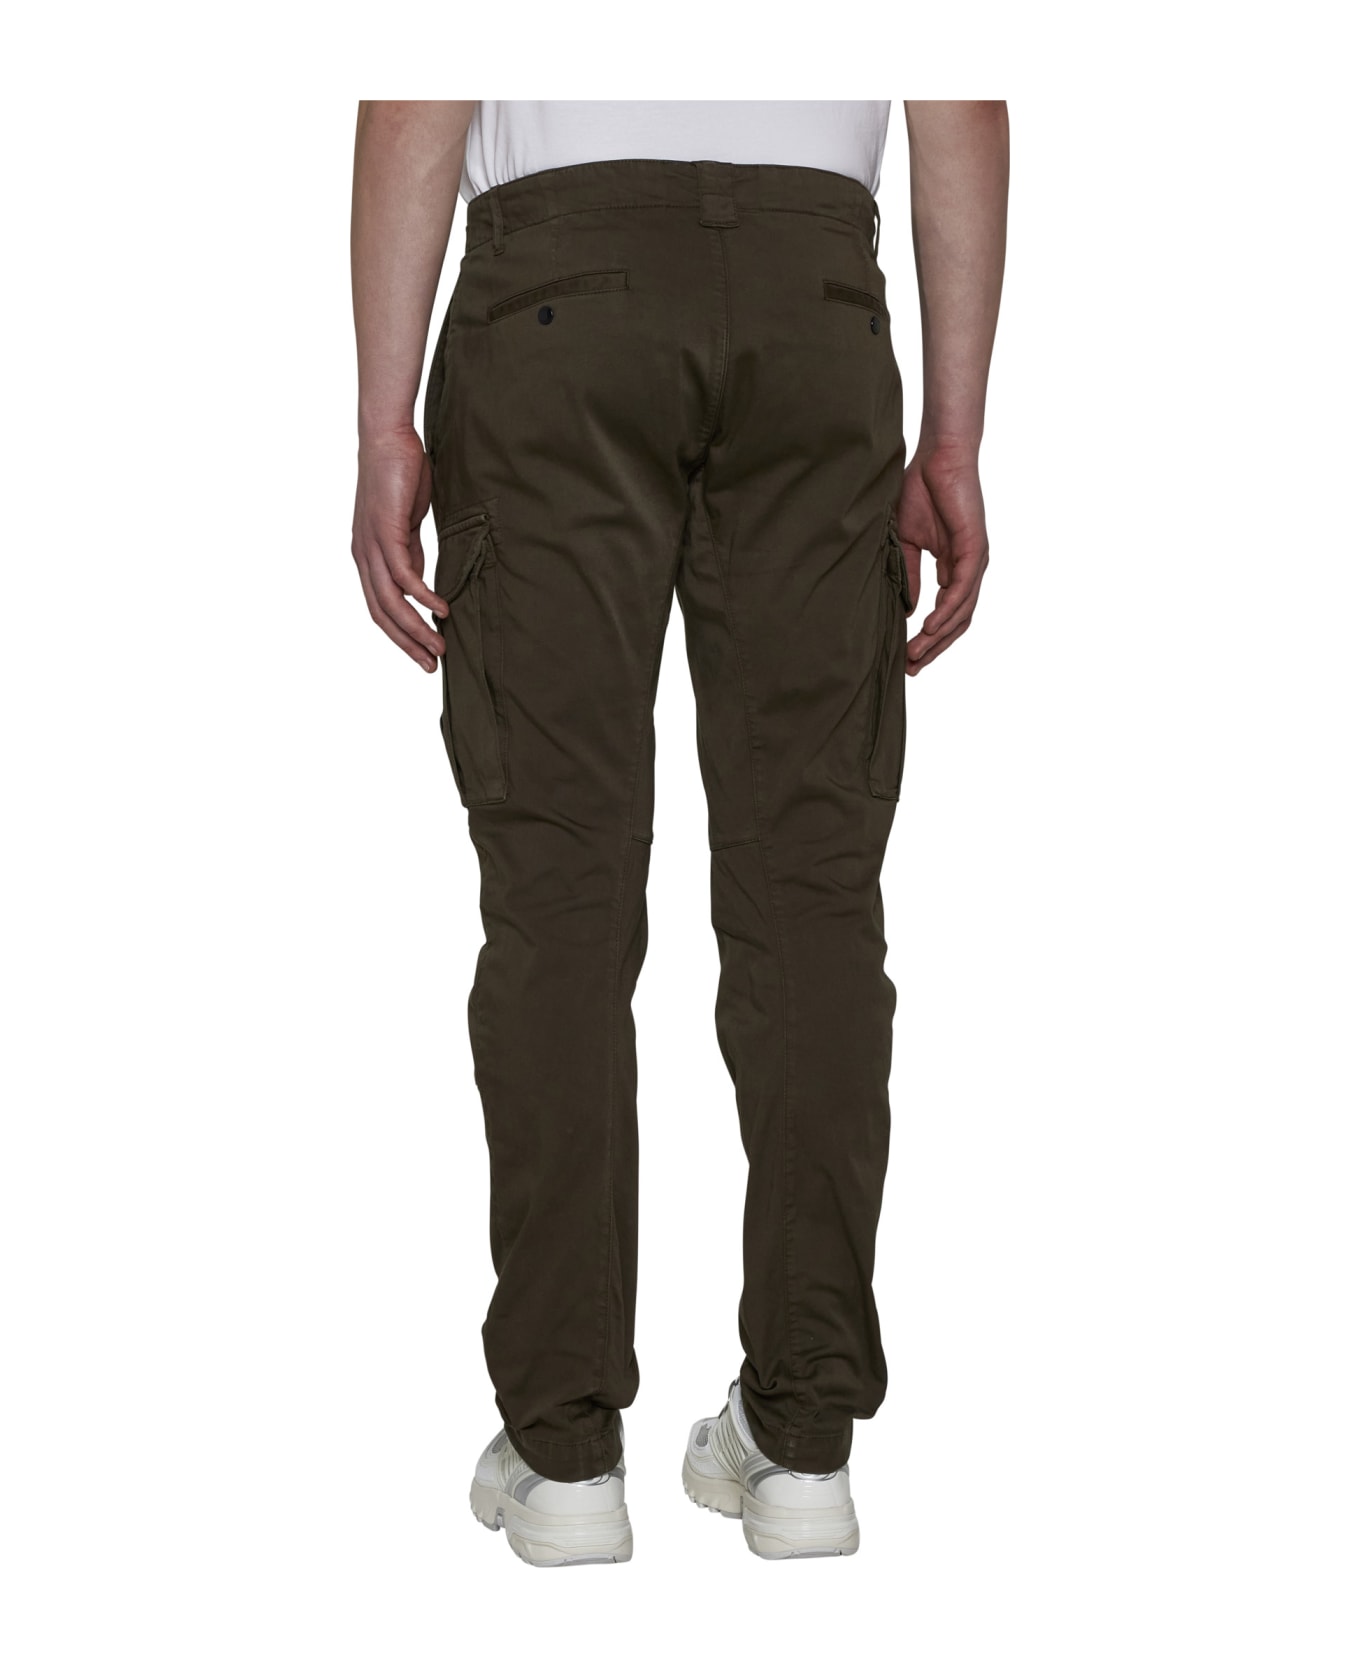 C.P. Company Stretch Cotton Cargo Pants - Ivy green ボトムス